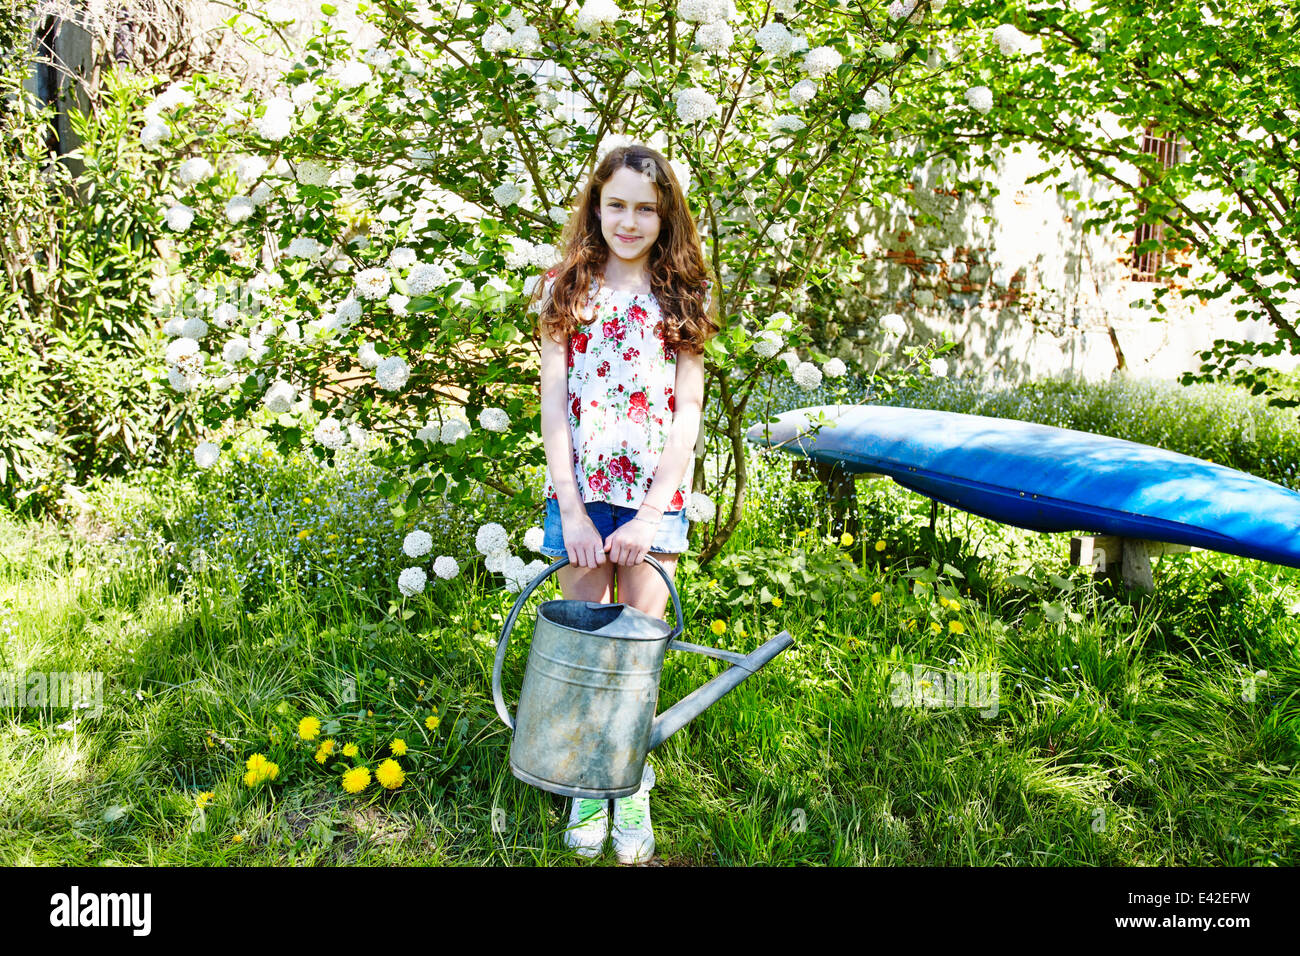 Girl holding watering can, portrait Stock Photo